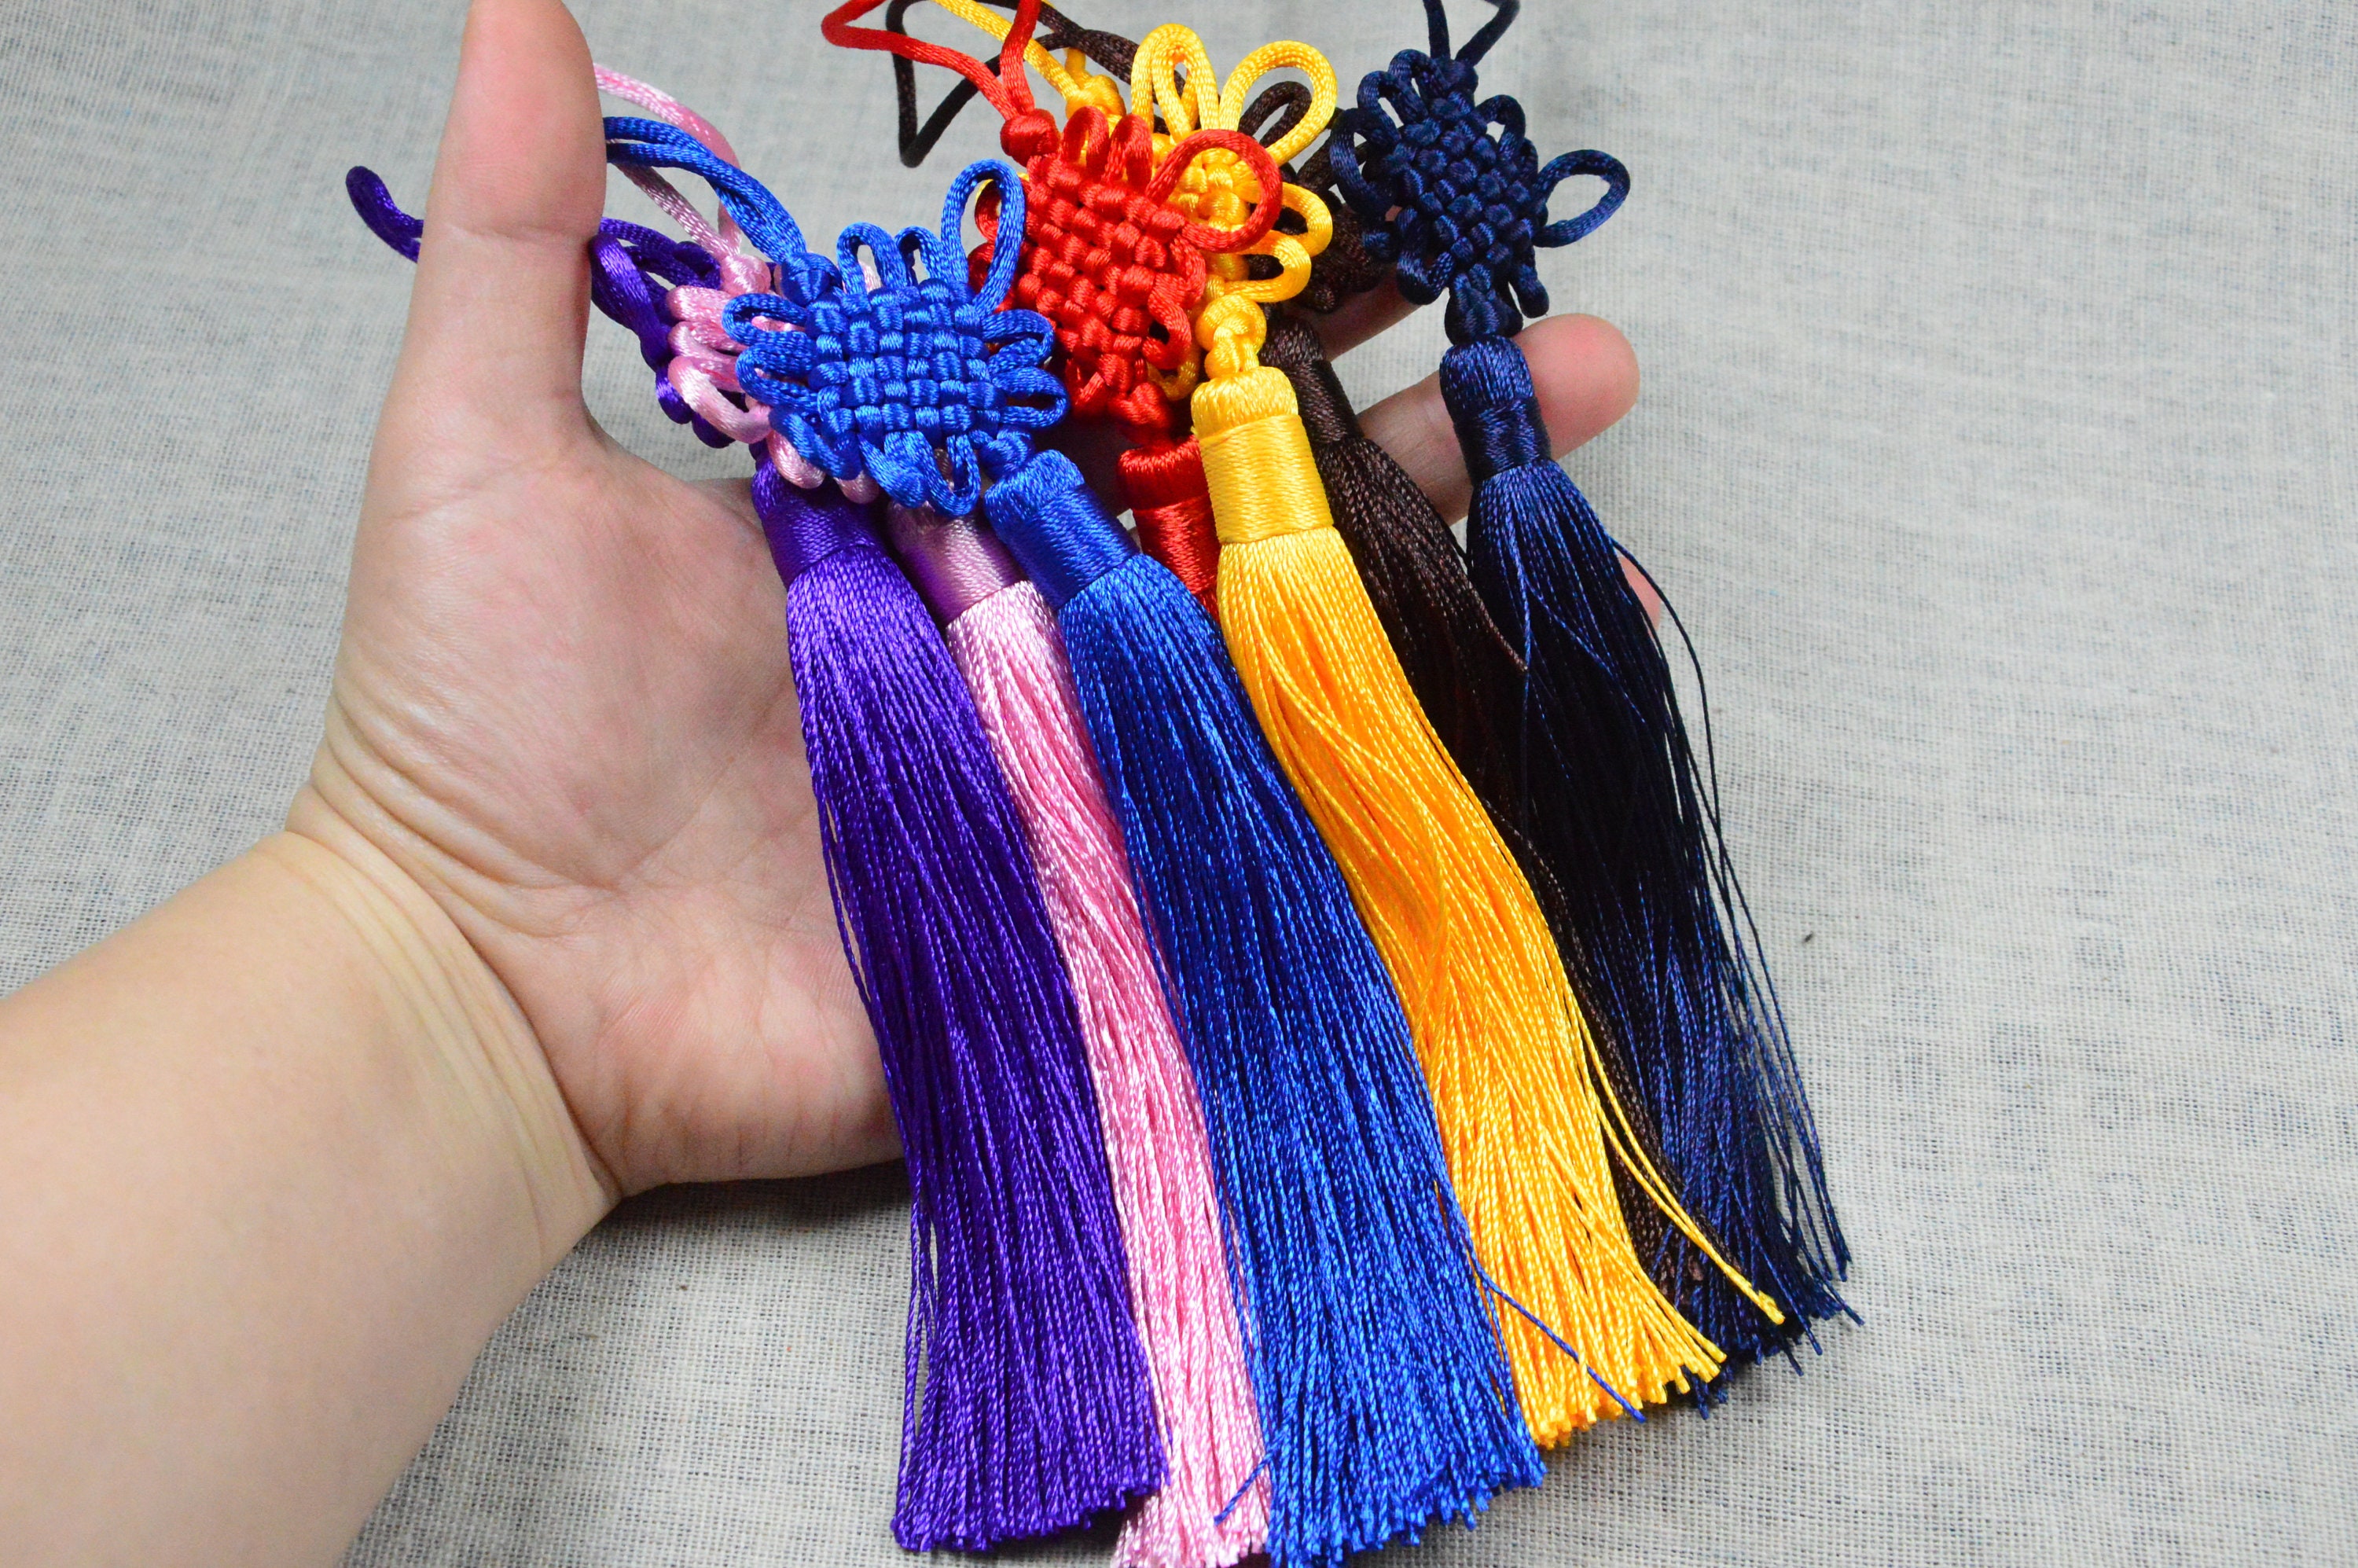 Large Chinese Knot Tassel Pendant Chinese New Year Hanging